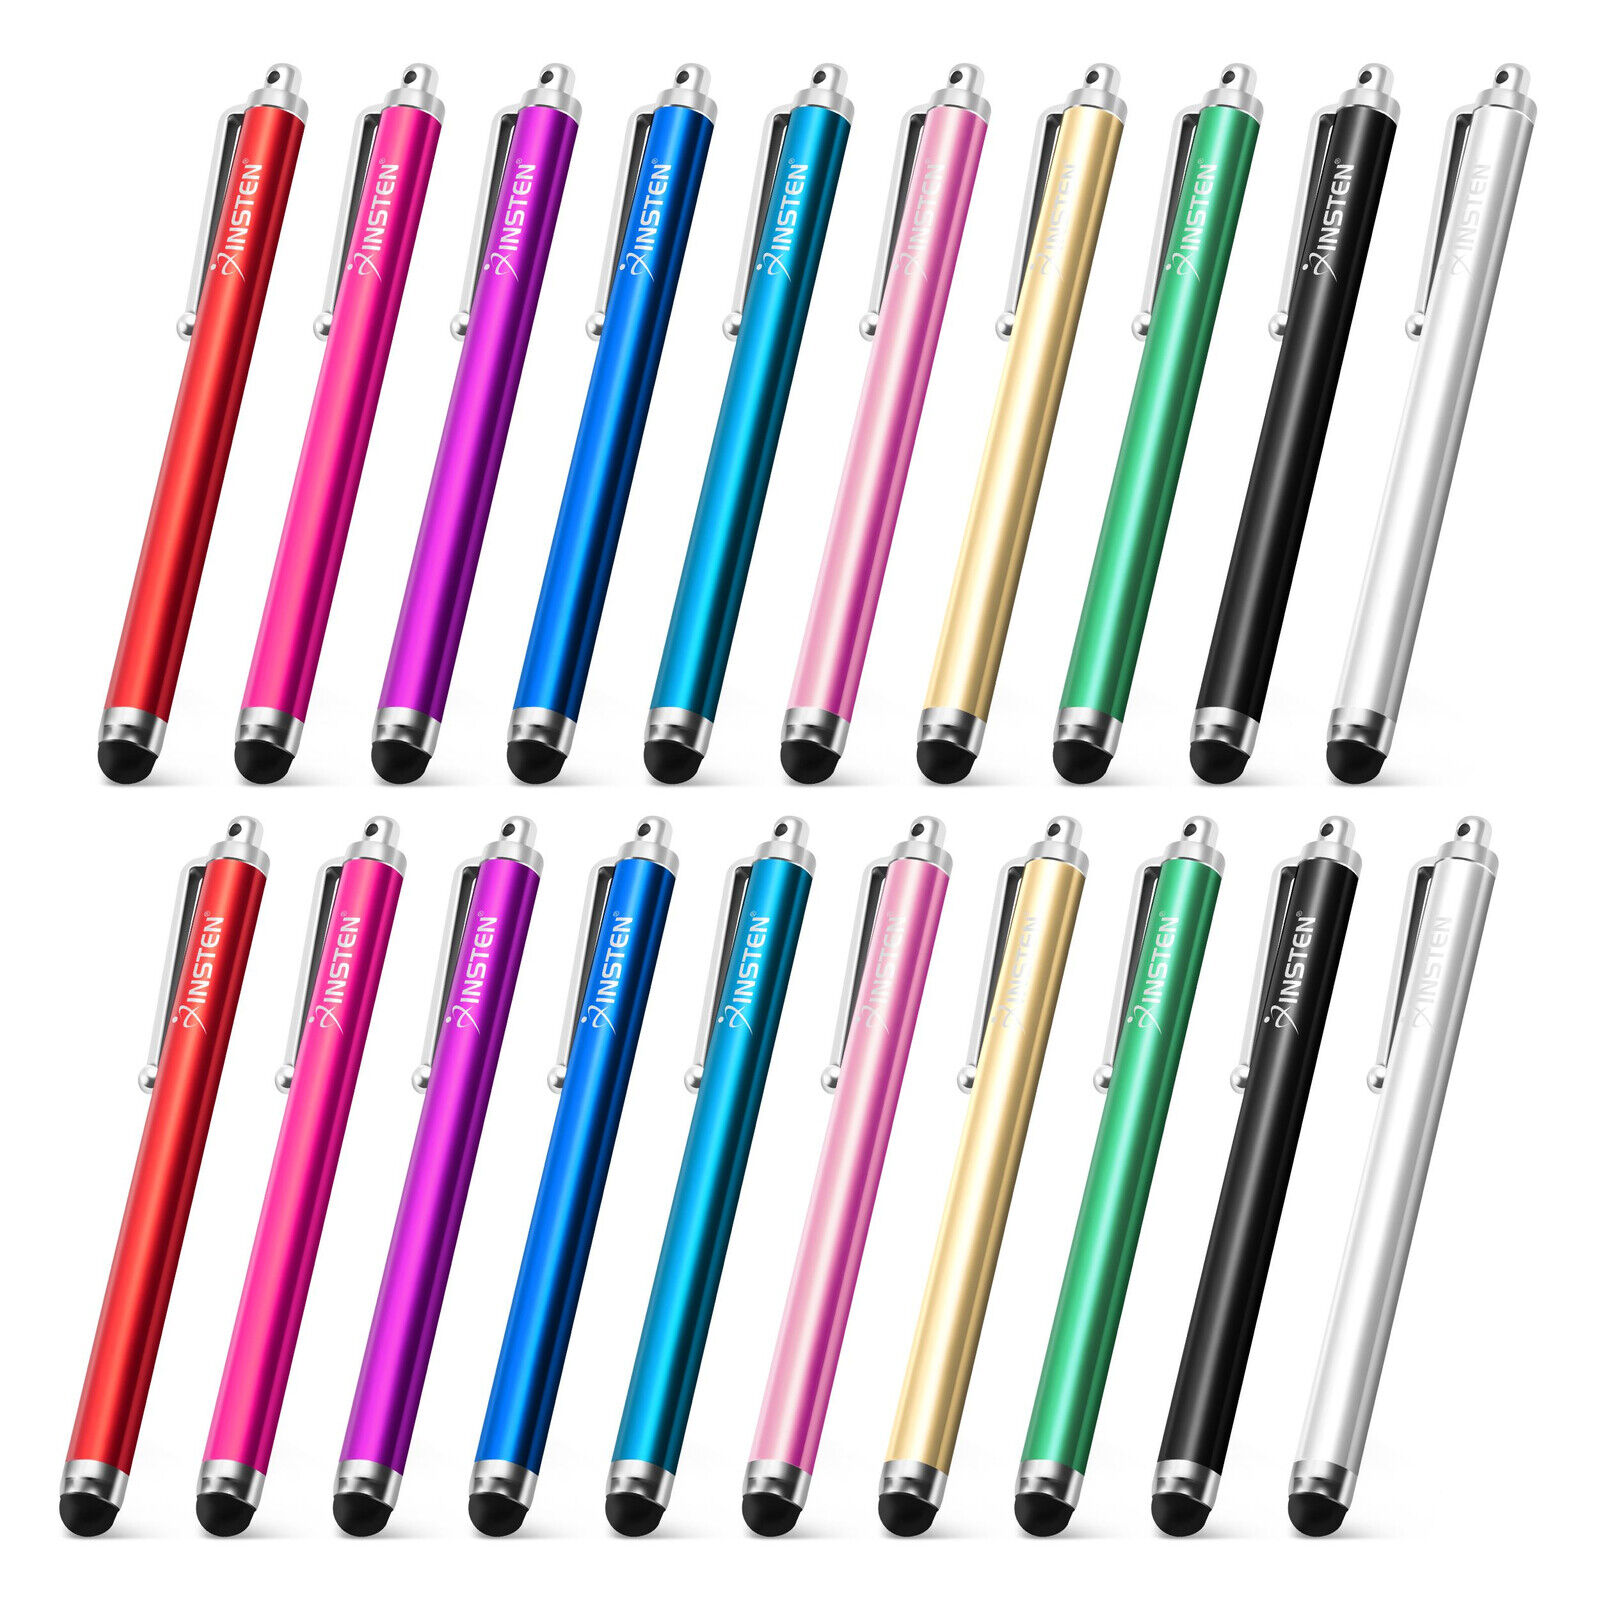 20 Pack Universal Capacitive Stylus Pen for All Touch Screens, 10 Multicolor